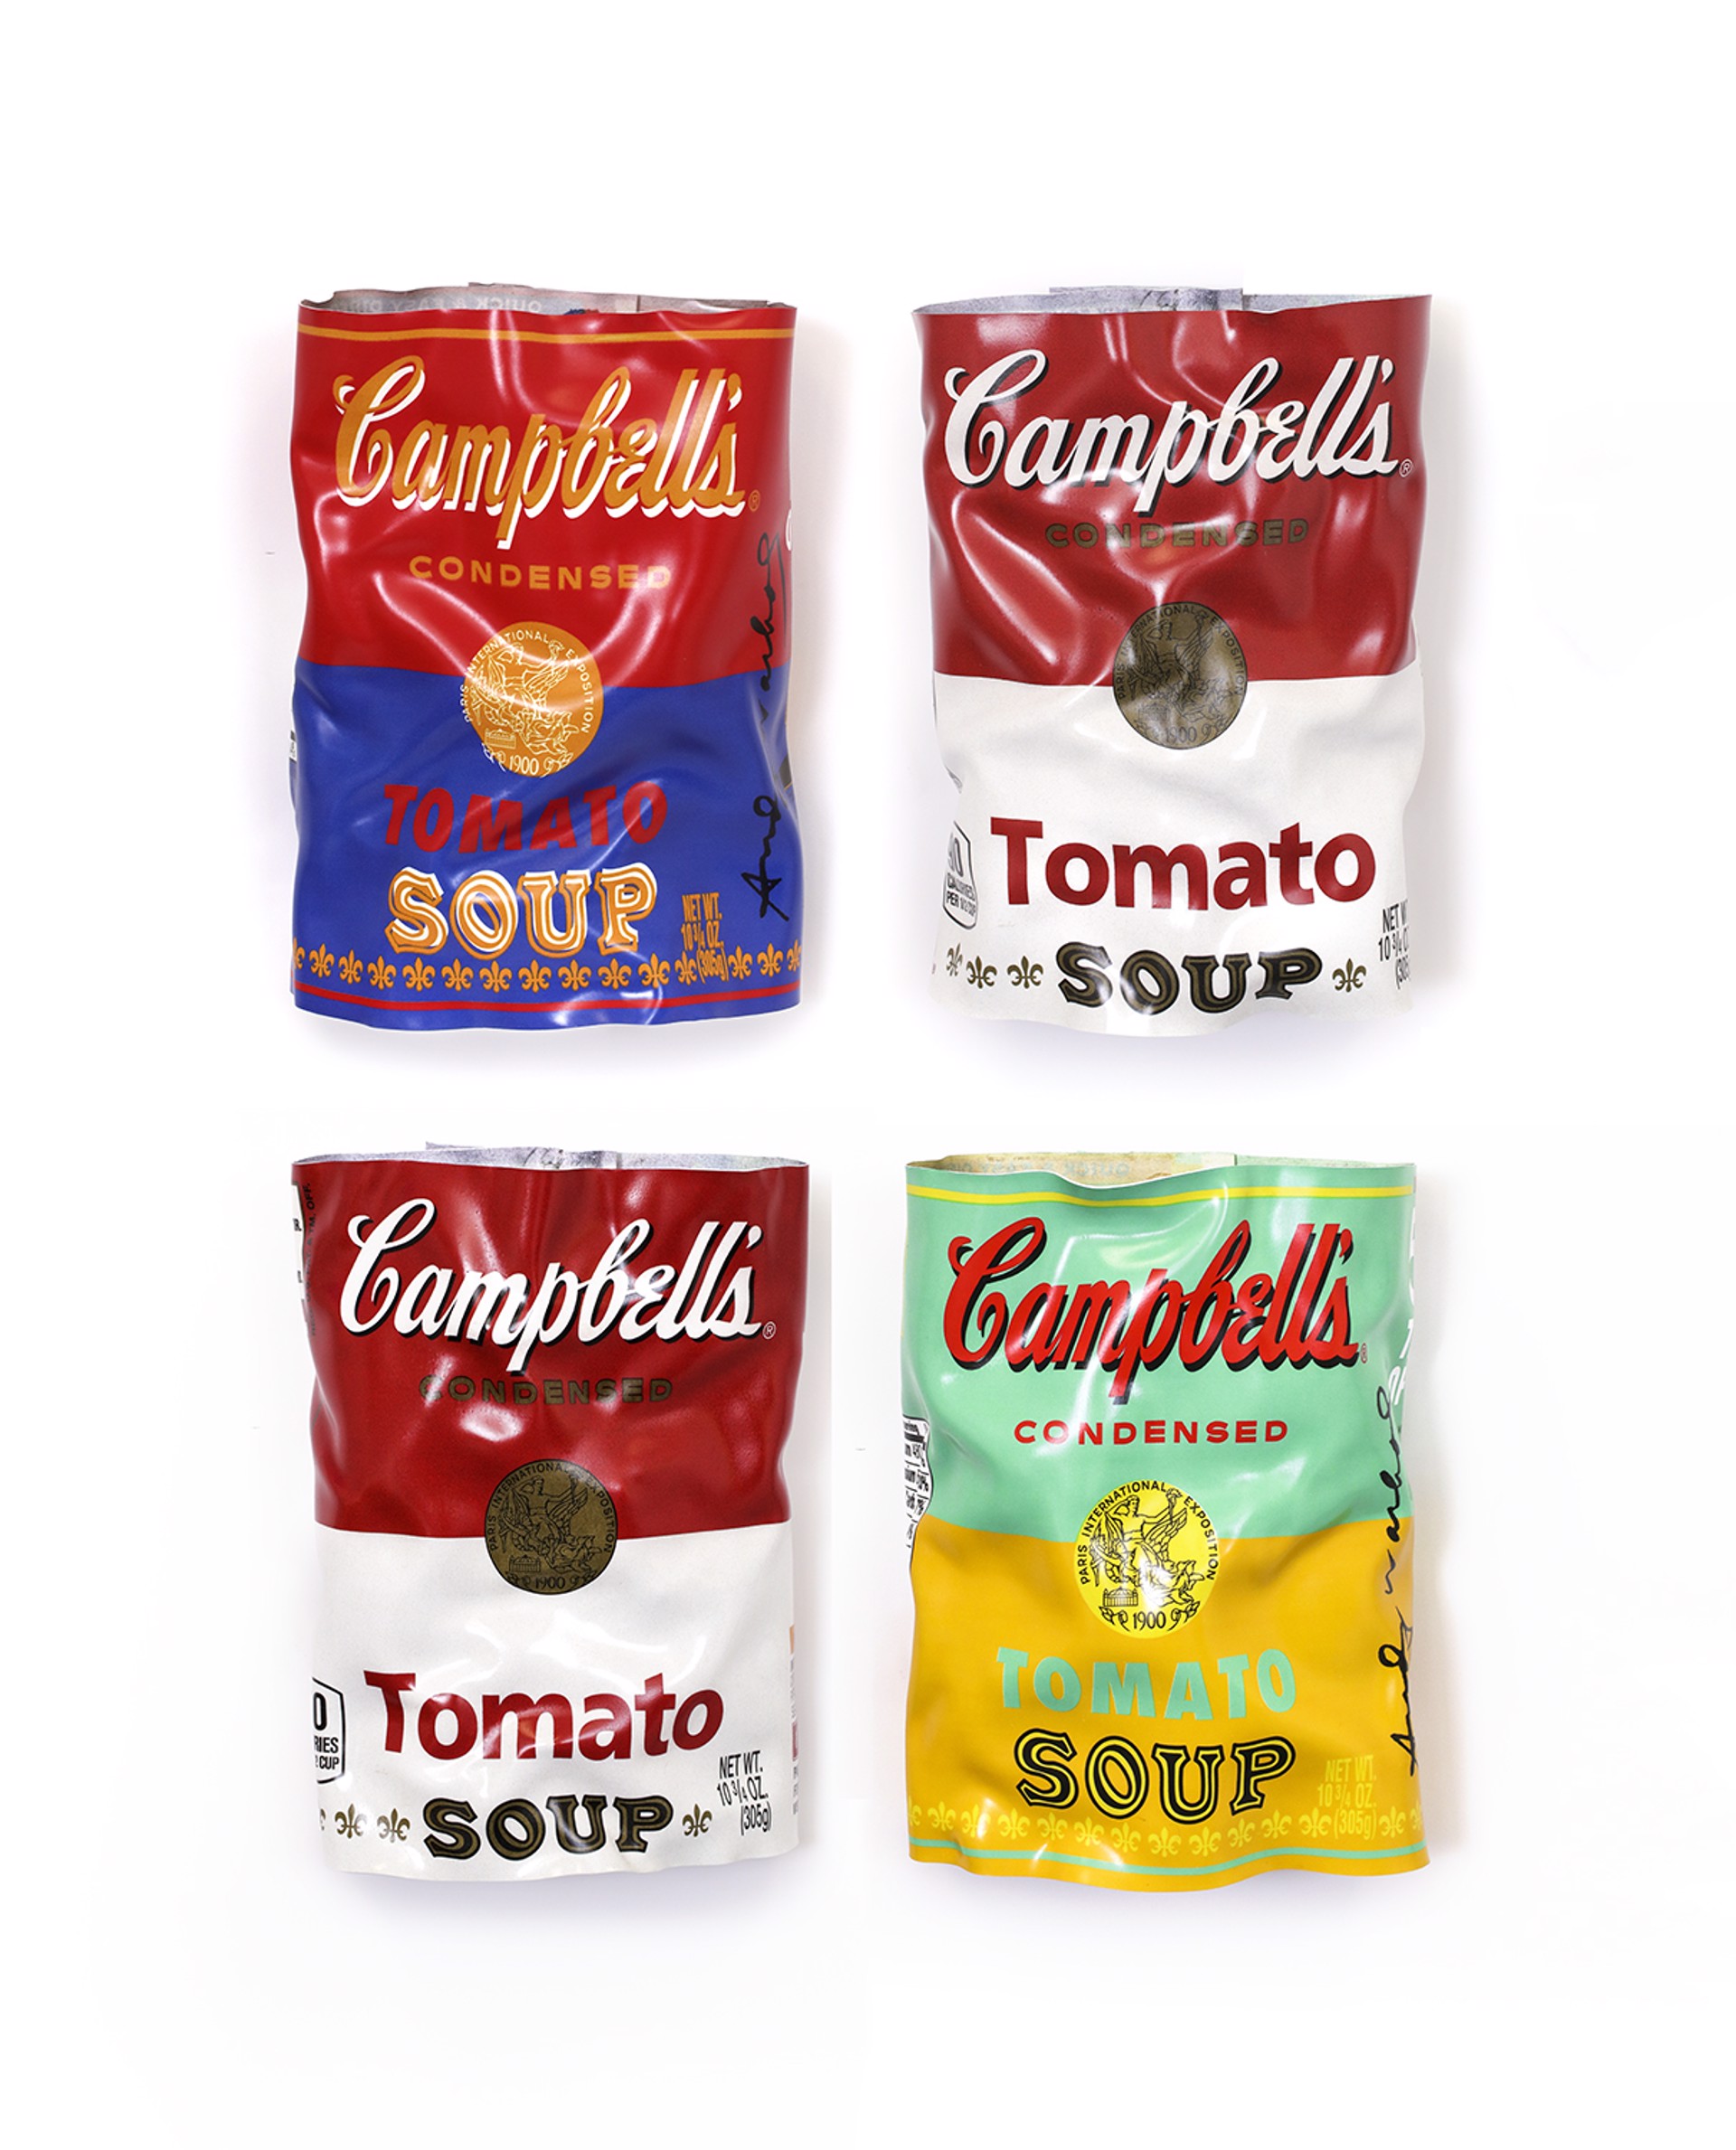 Tomato Soup Can by Paul Rousso